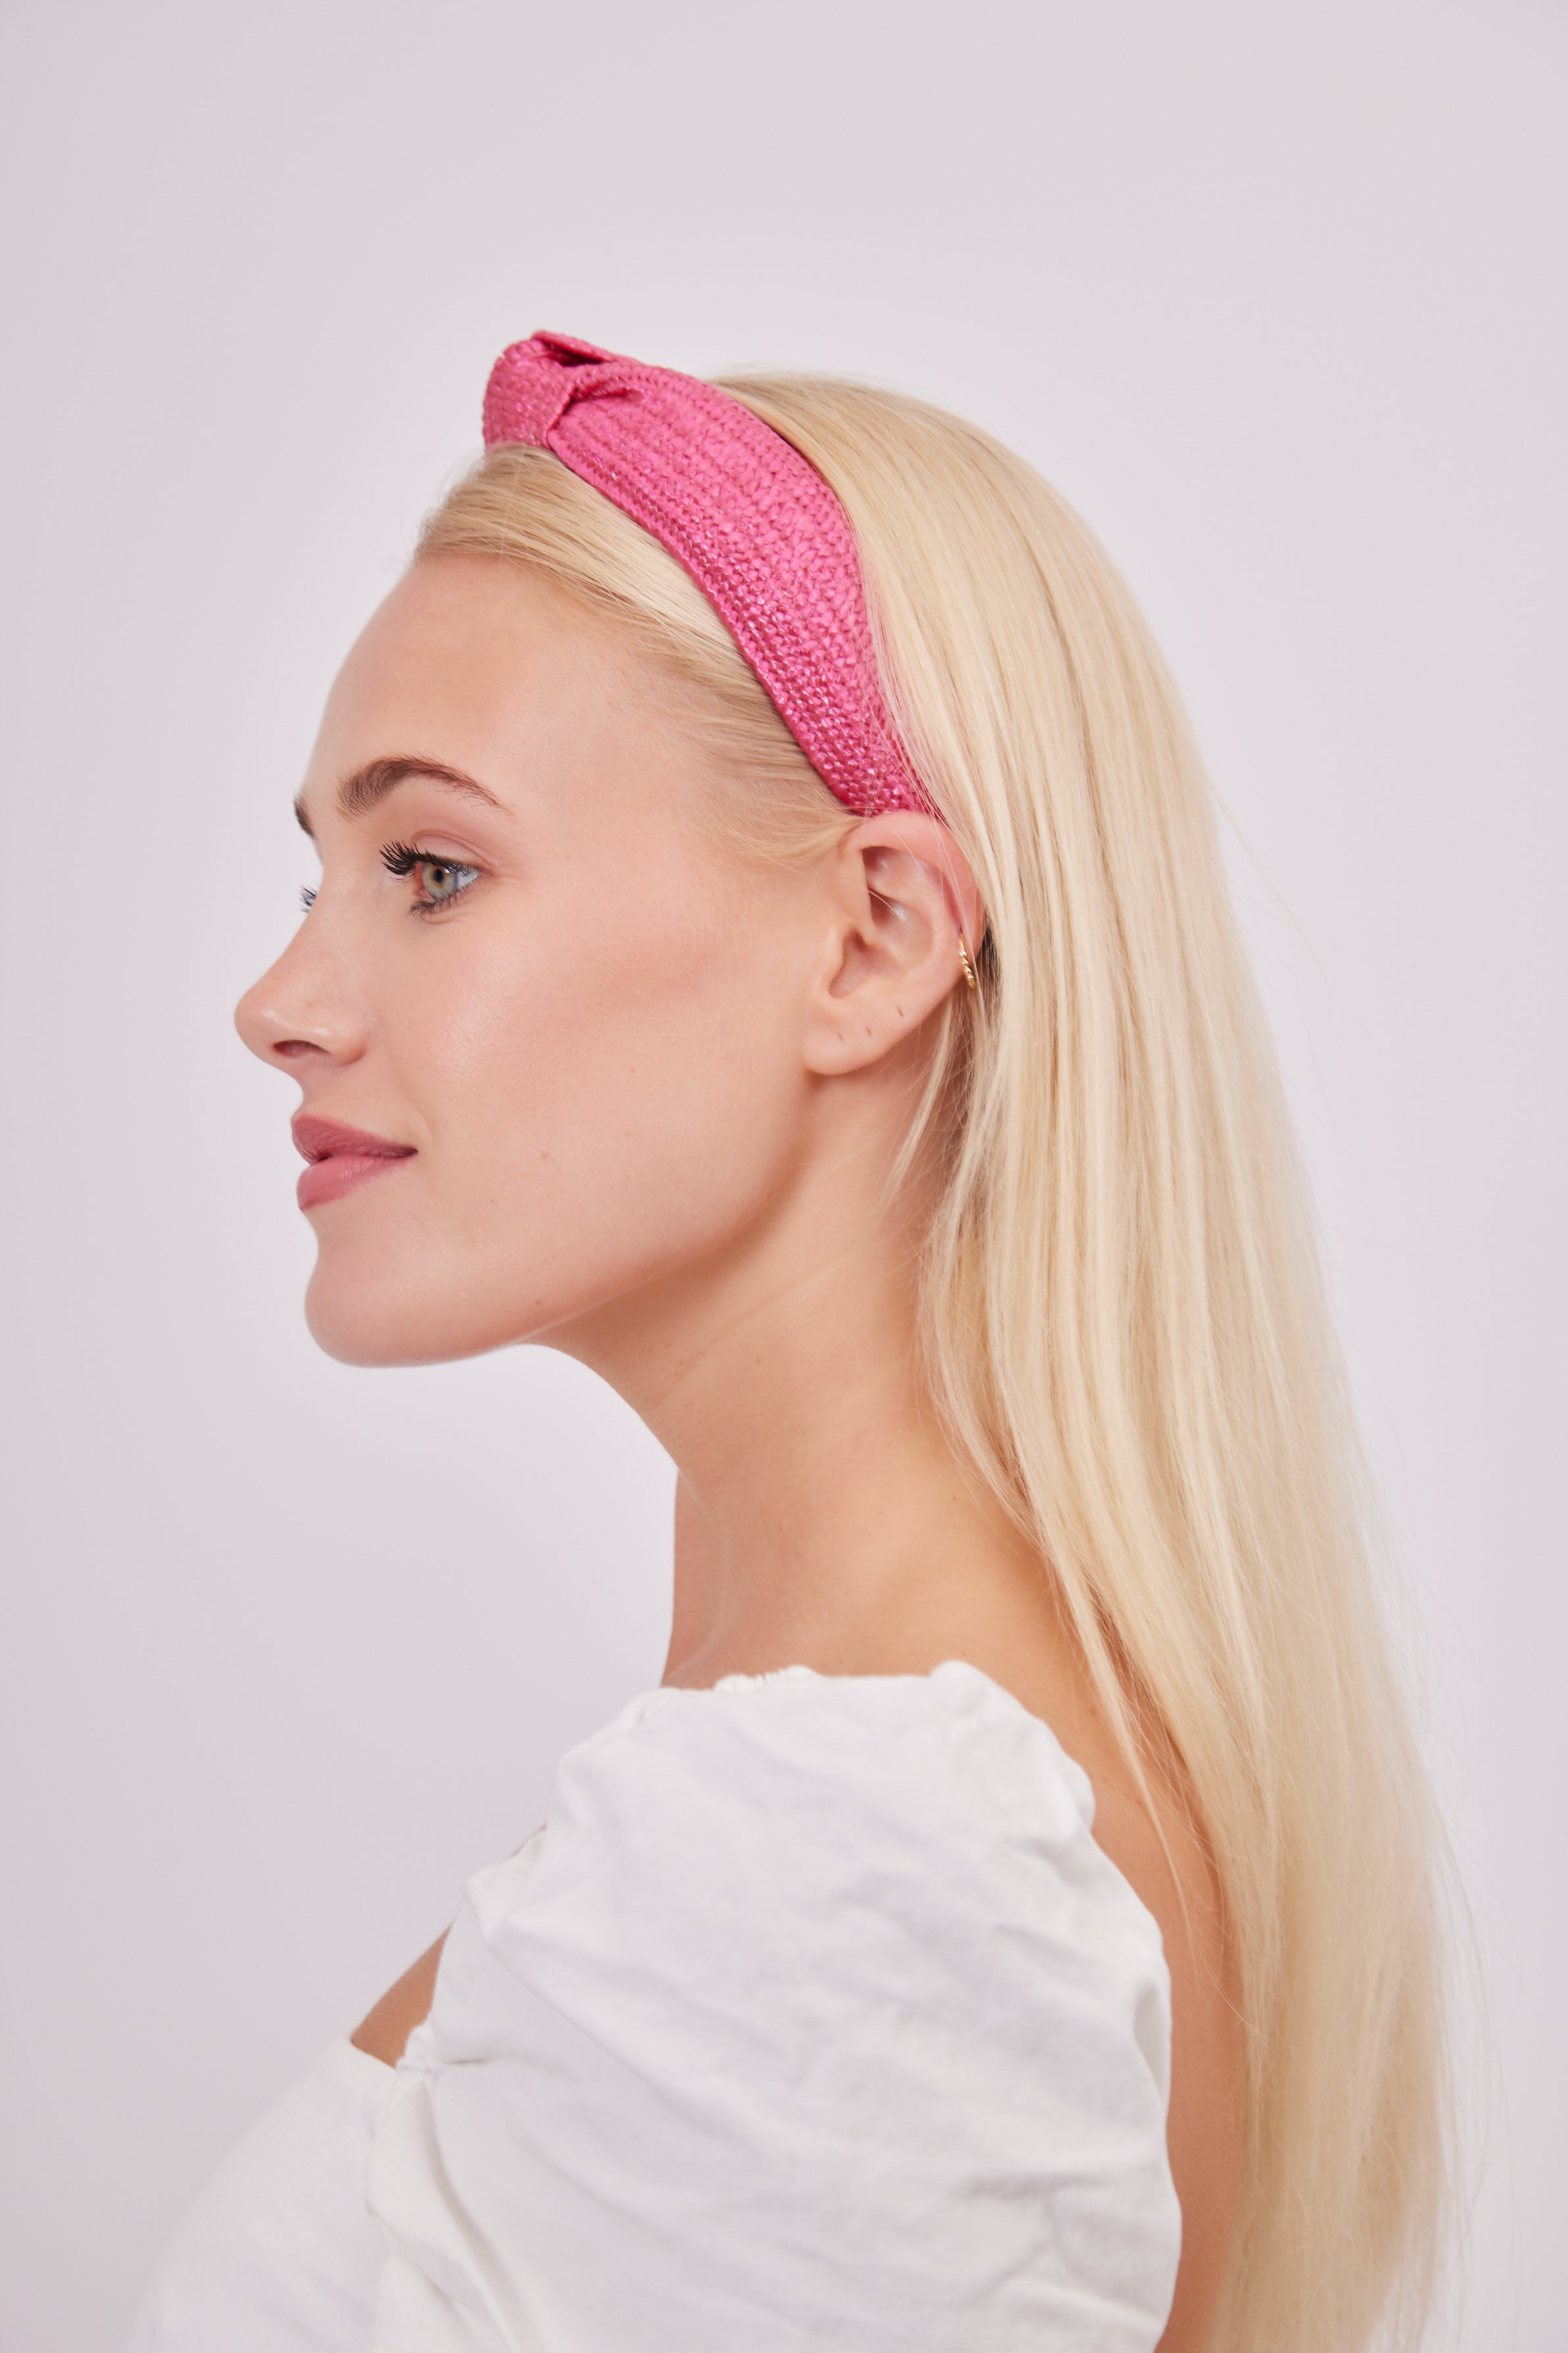 Woven Knot Headband in Pink | Woven | Wedding | Wedding guest | Occasion | Races | Beach | Holiday | Party | Glam | Women's Accessories | Accessory | Hair Accessory